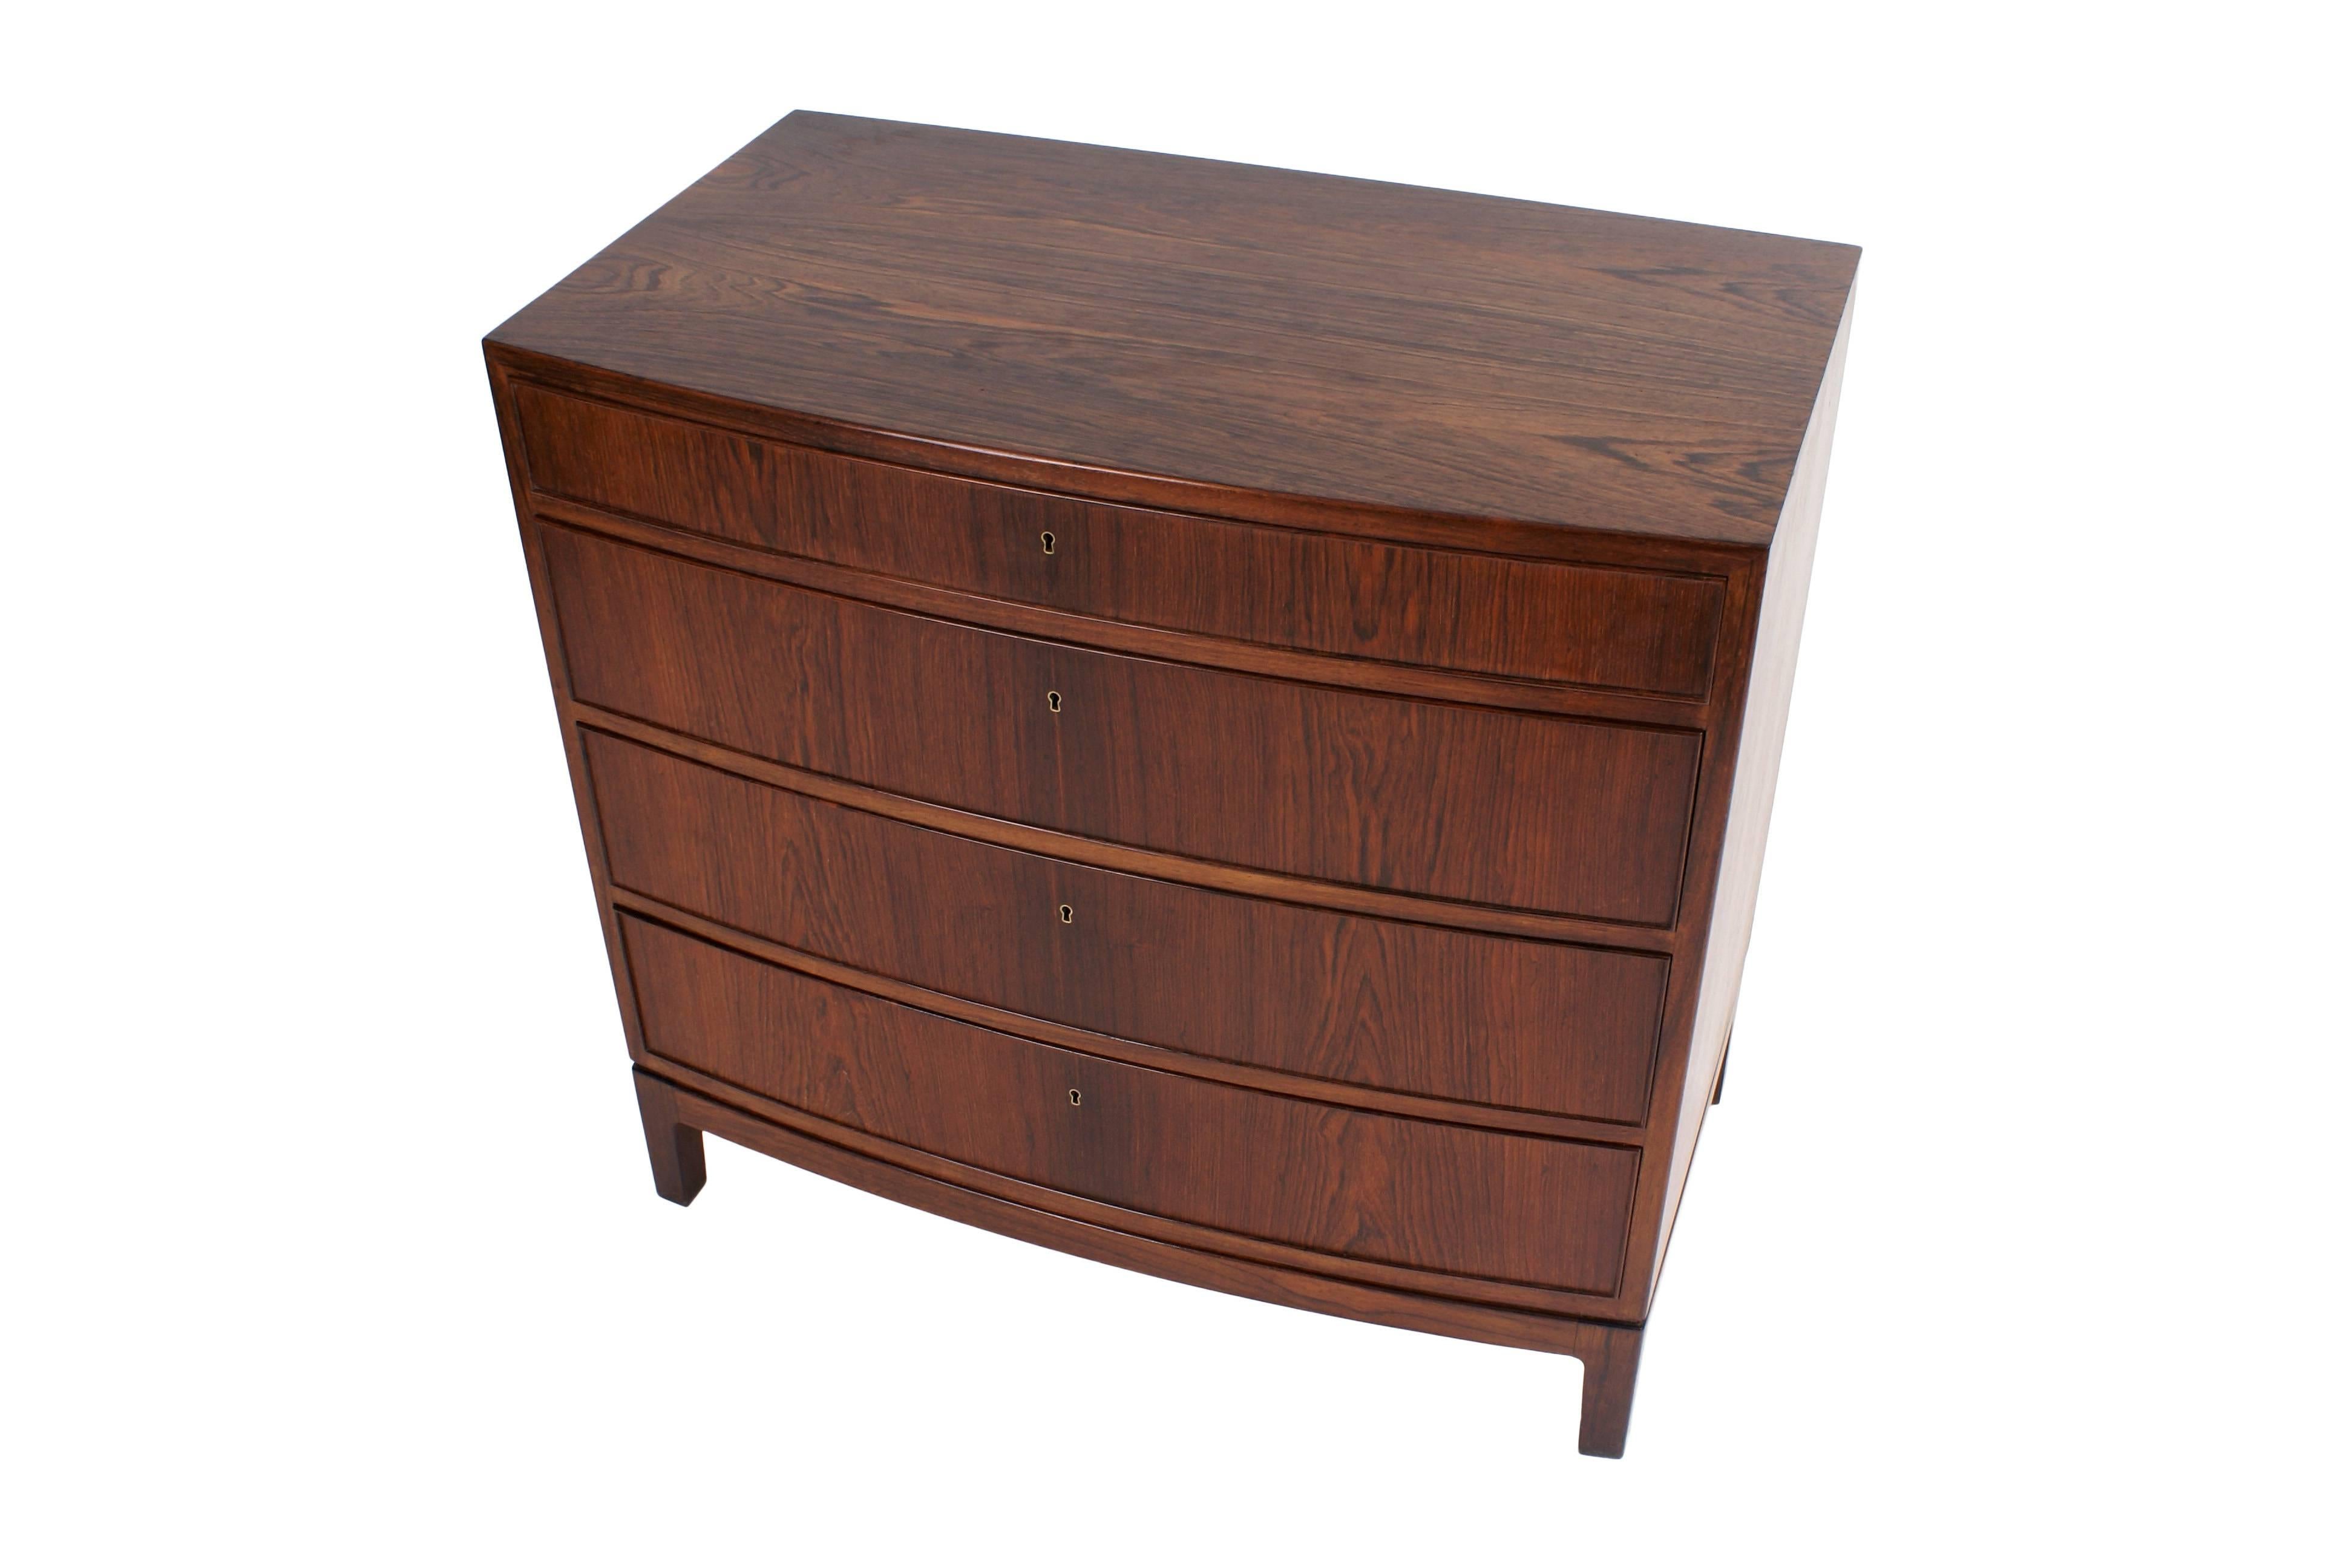 Ole Wanscher chest of drawers in Brazilian rosewood, curved front with four profiled drawers. This example made 1950-1960s by master cabinetmaker A.J. Iversen. Comes with key.